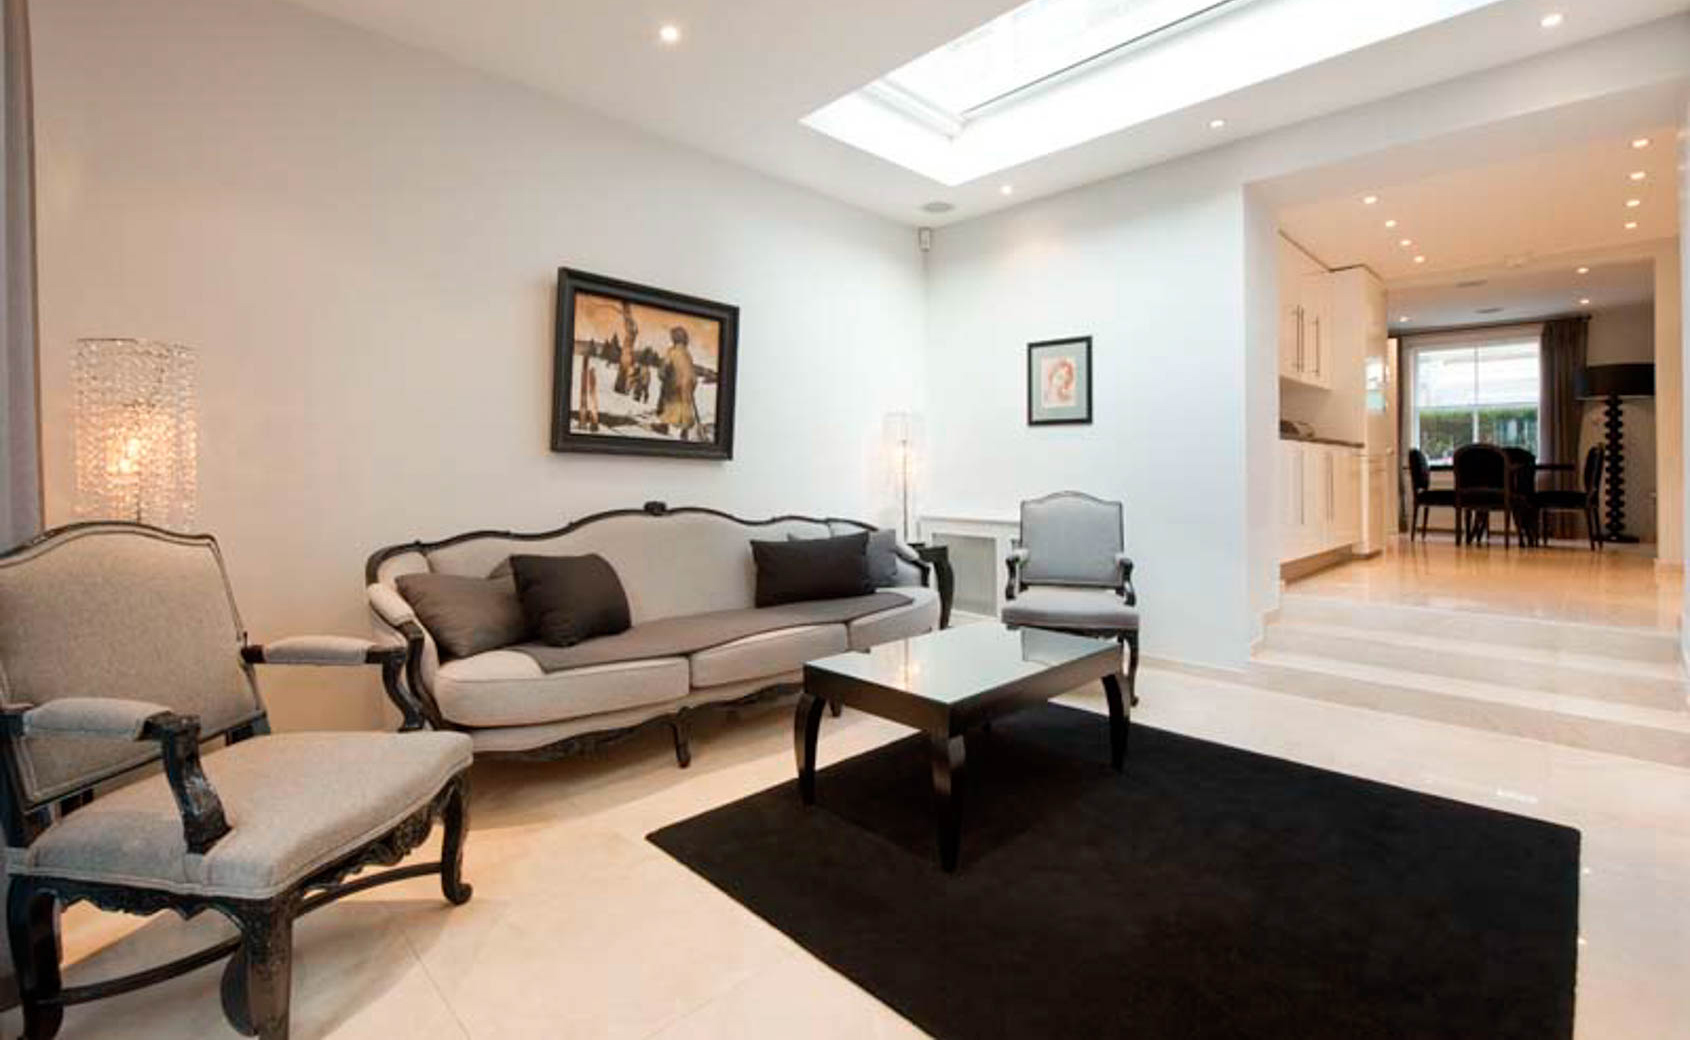 <p>Lovelydays Luxury Rentals introduce you pictures of a charming house in the heart of Belgravia</p>